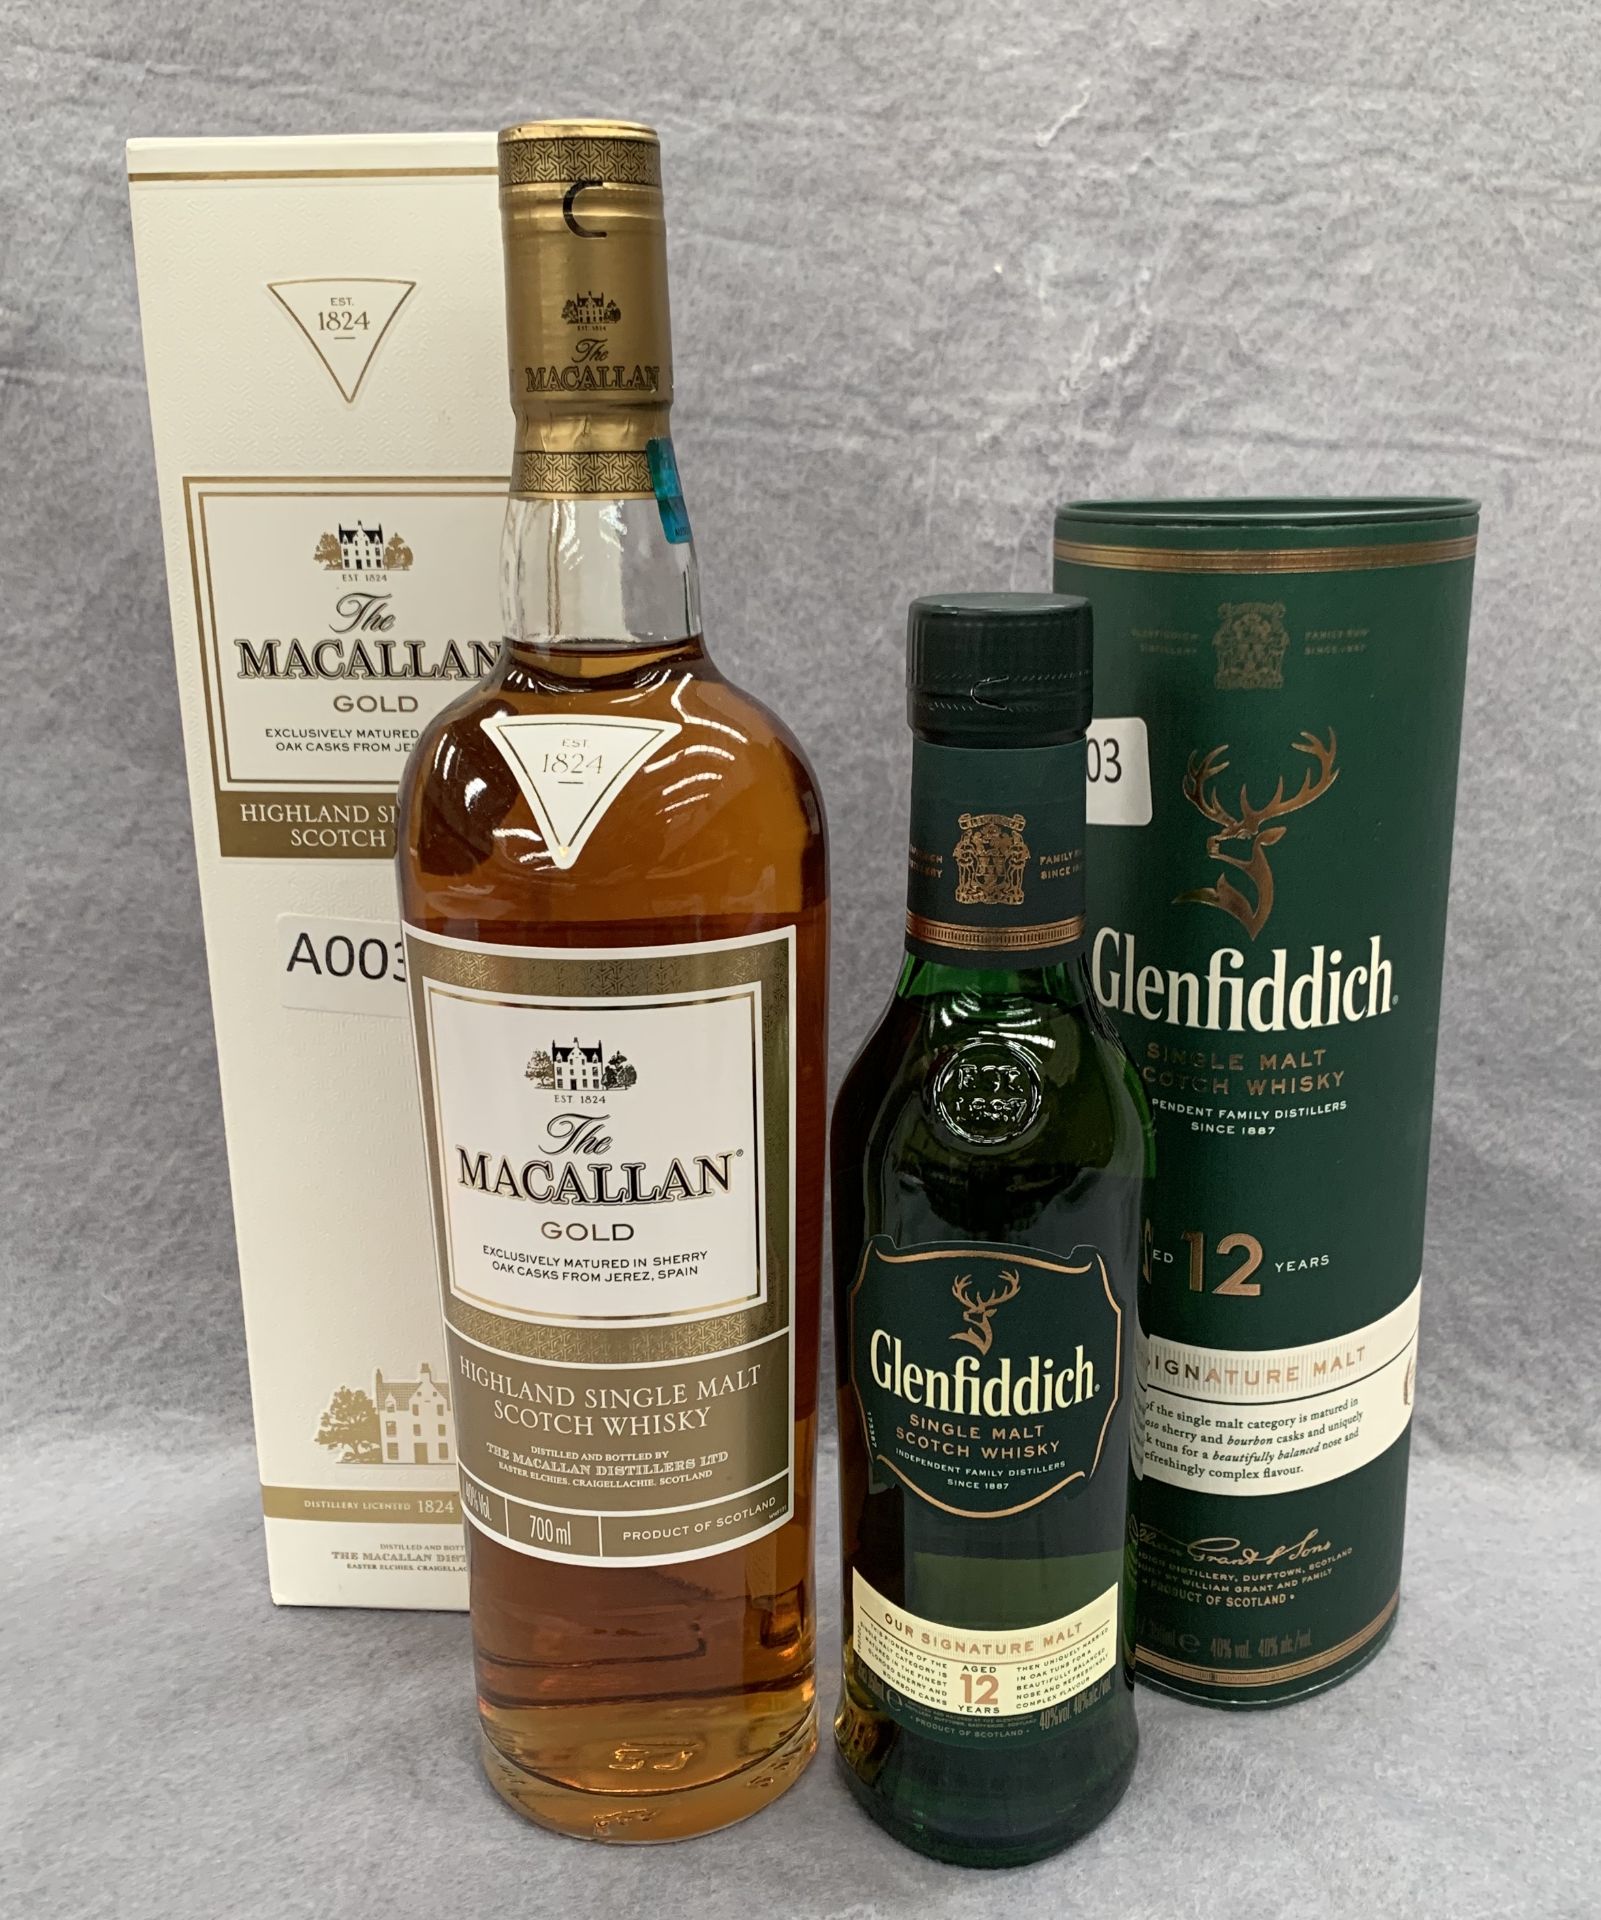 A 700ml bottle of The Macallan Gold Highland Single Malt Scotch Whisky in presentation box and a